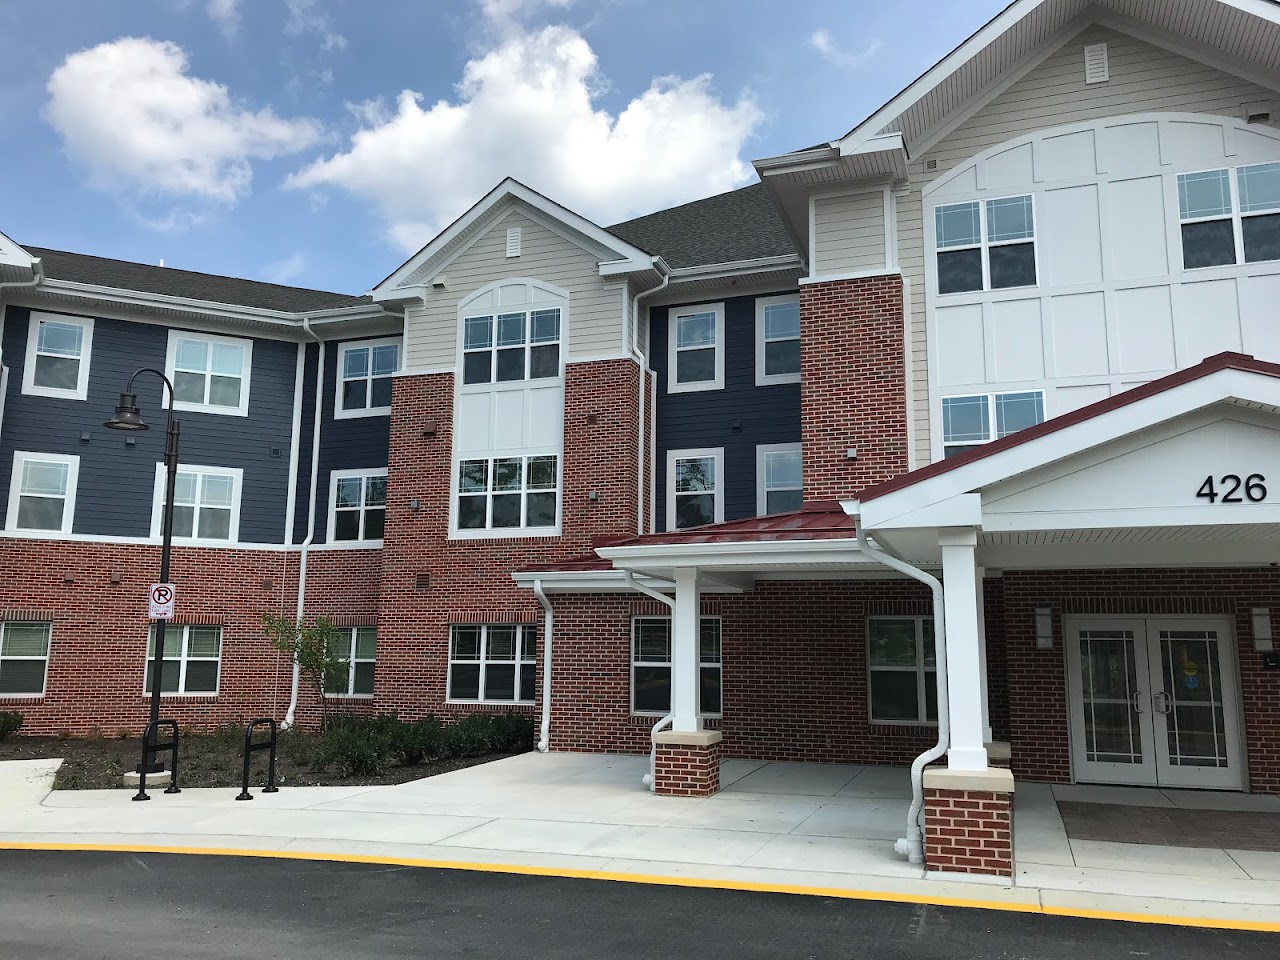 Photo of MOUNT JEZREEL SENIOR HOUSING. Affordable housing located at 420 UNIVERSITY BLVD EAST SILVER SPRING, MD 20901